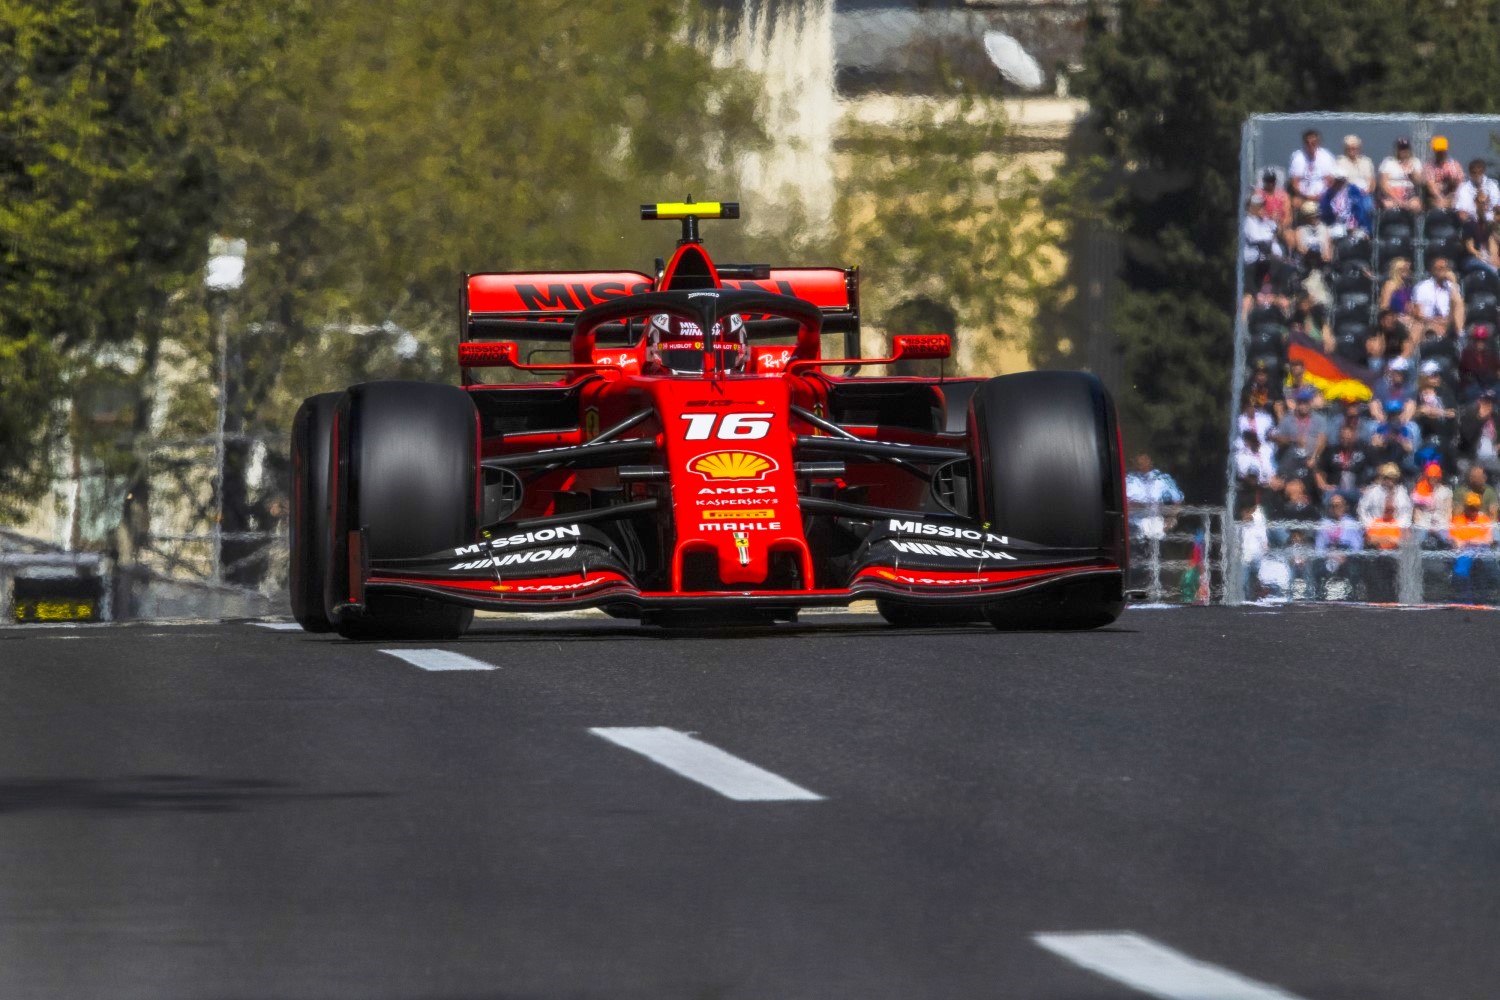 Charles Leclerc was a backmarker until Ferrari hired him. F1 is 99% car. How many other great drivers are saddled with noncompetitive cars in F1?